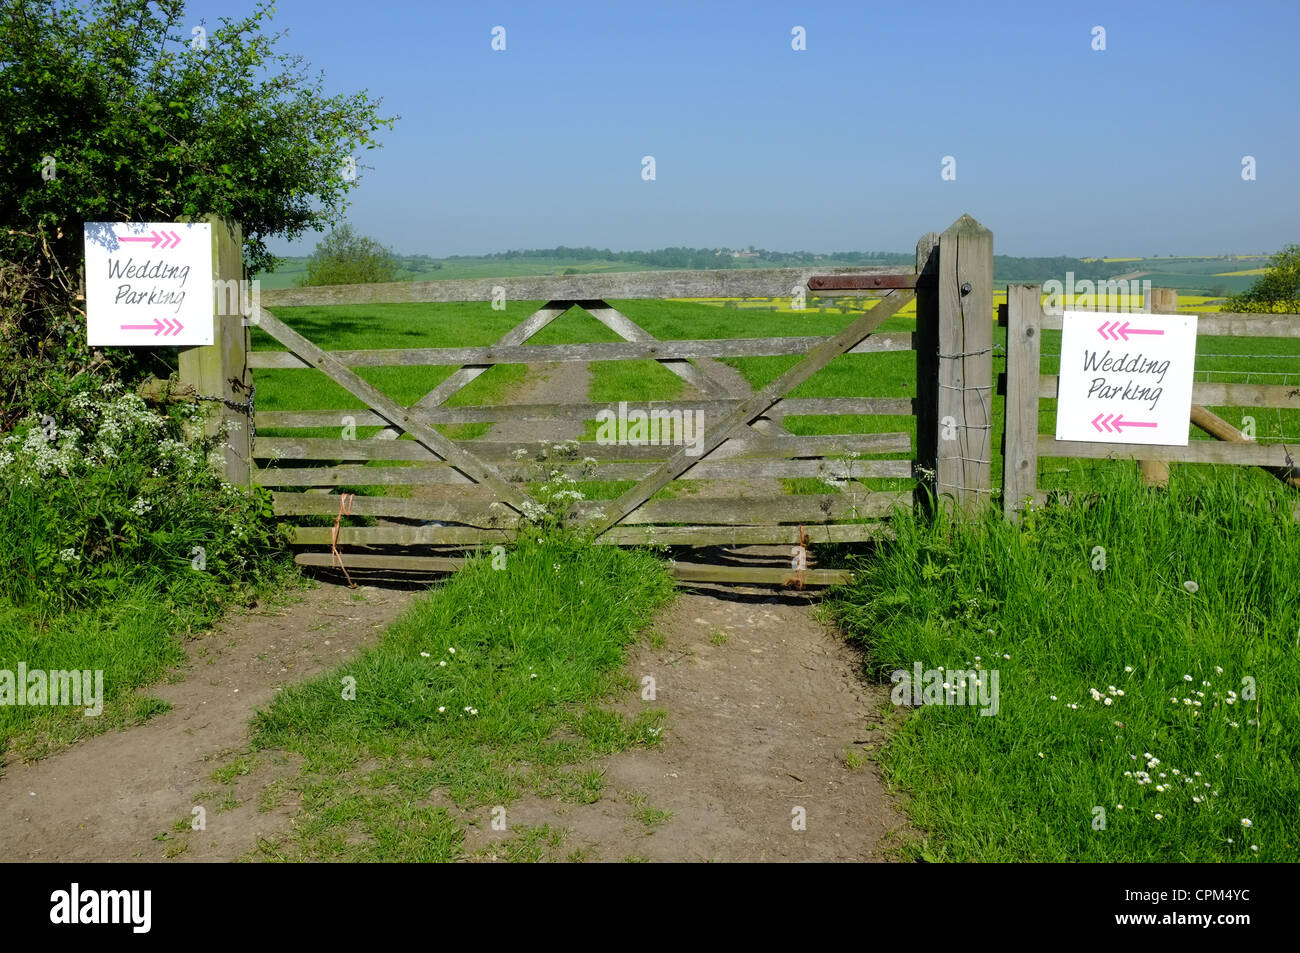 sign on rural gatepost showing parking area for wedding party Stock Photo